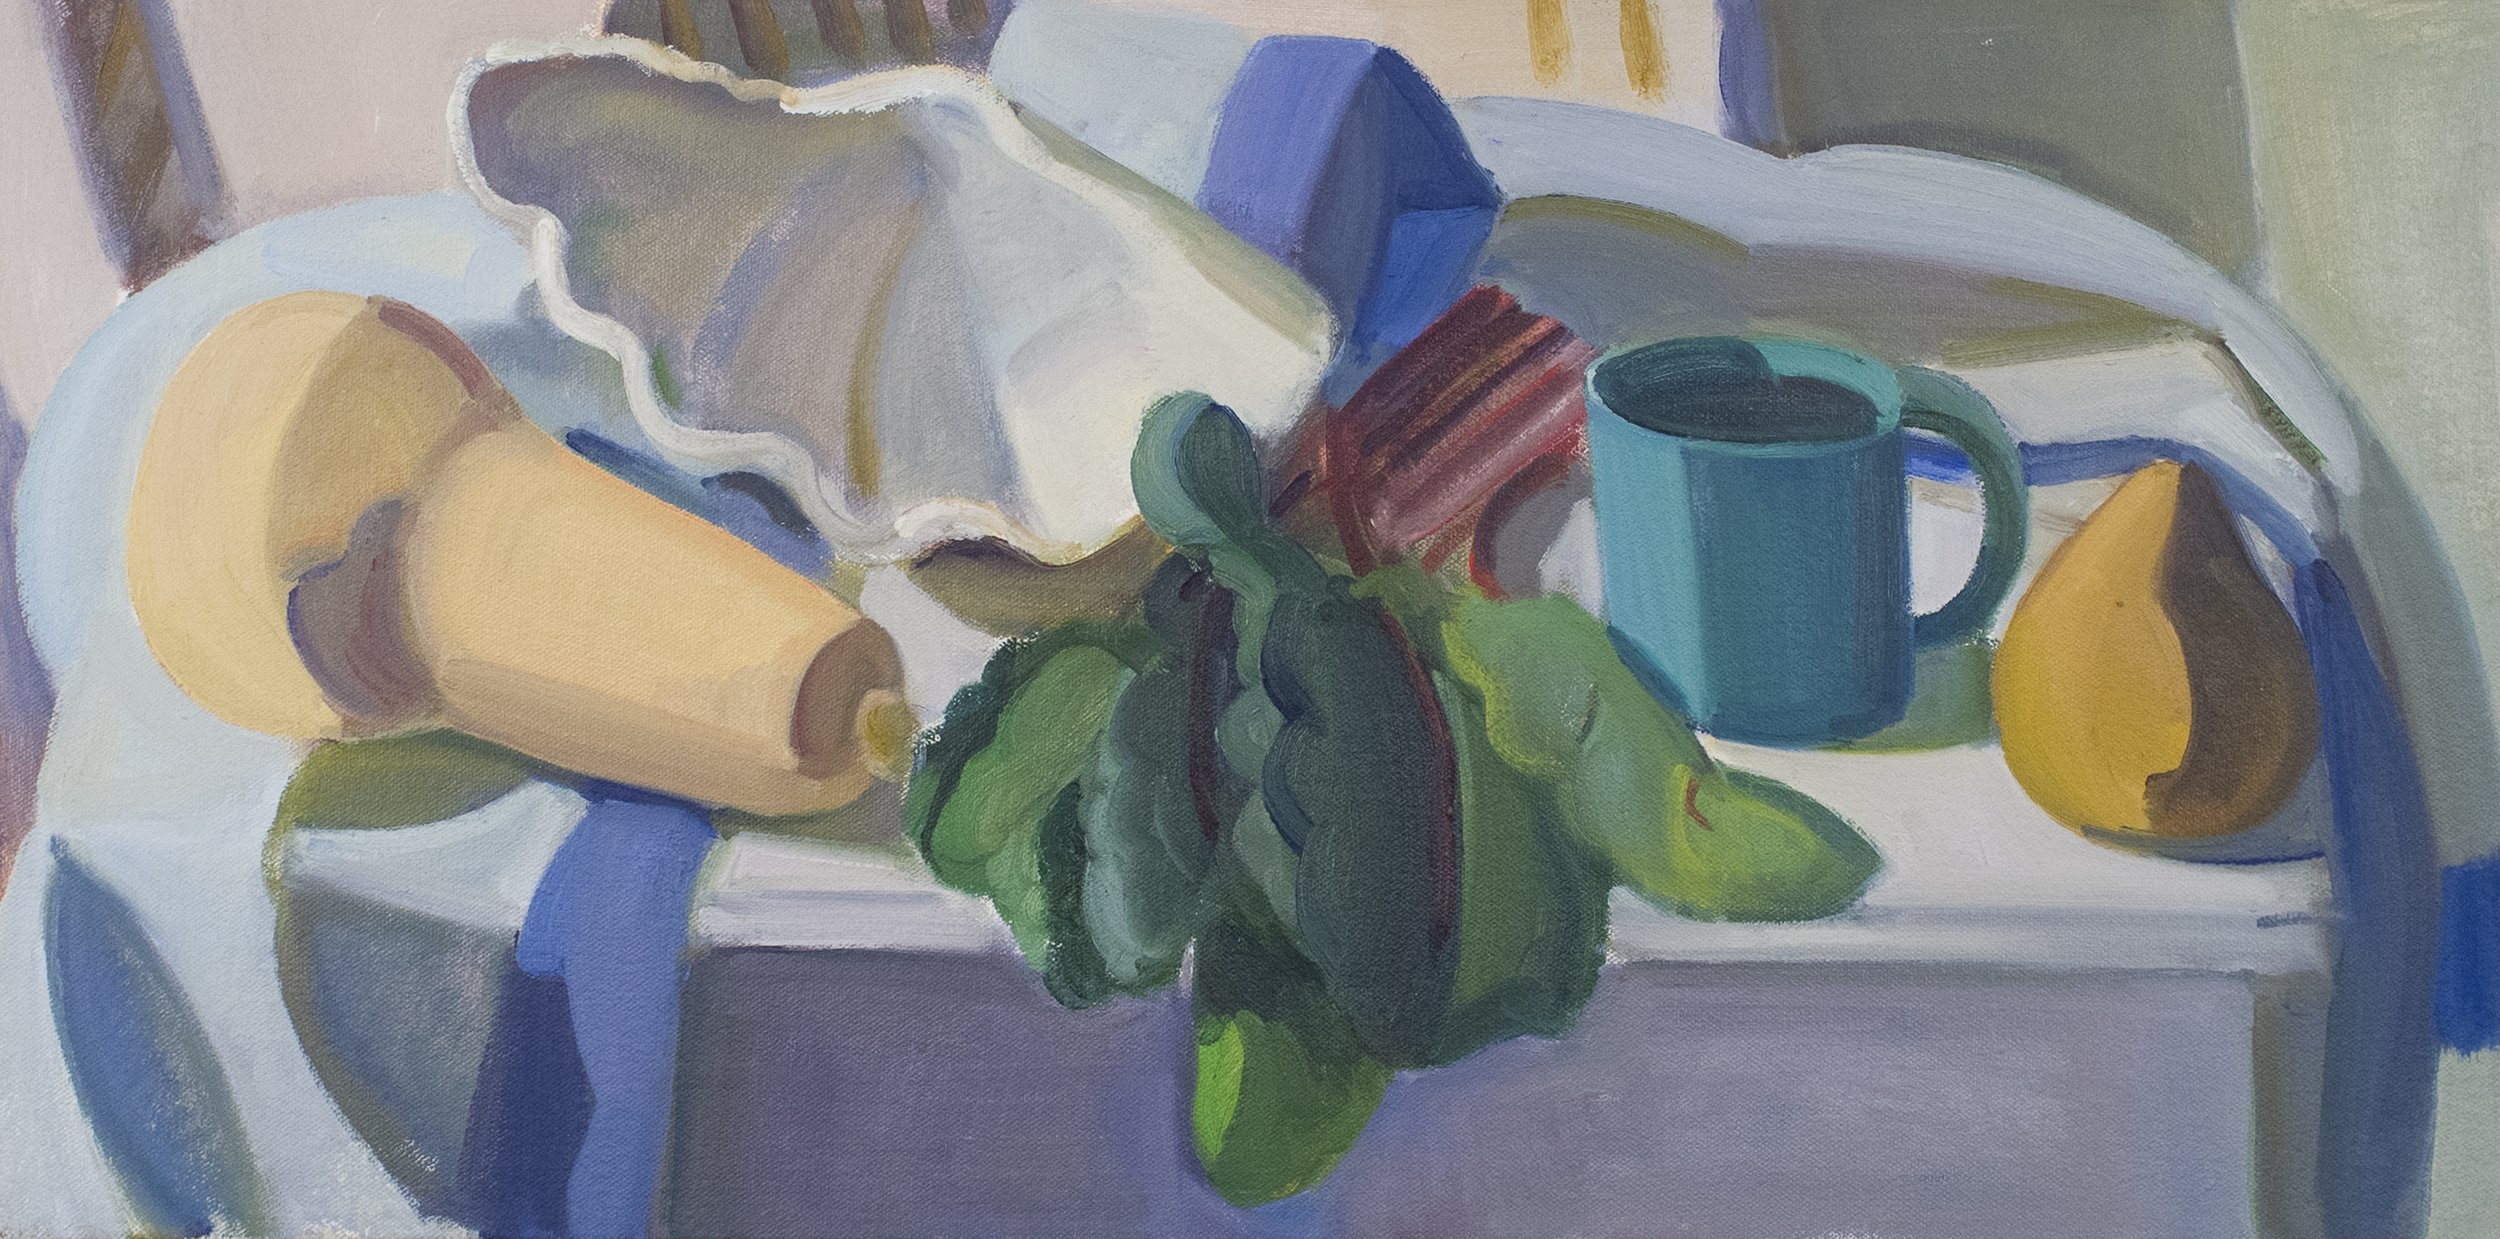   Butternut, Swiss Chard and Shell , 1999, oil/canvas (signed and framed by the artist), 12 x 24 in., $1,750 